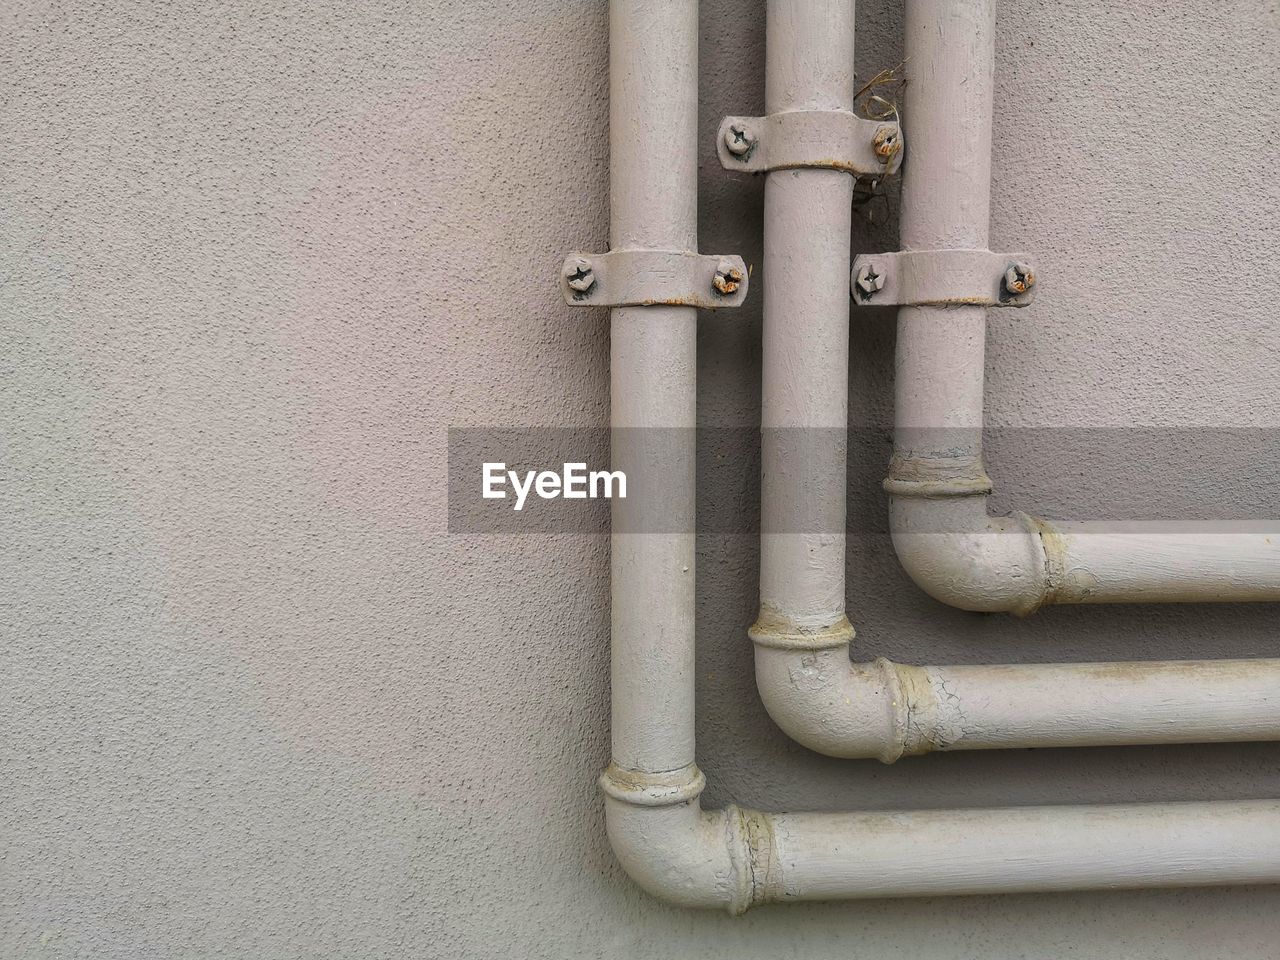 Gas pipe system on the wall